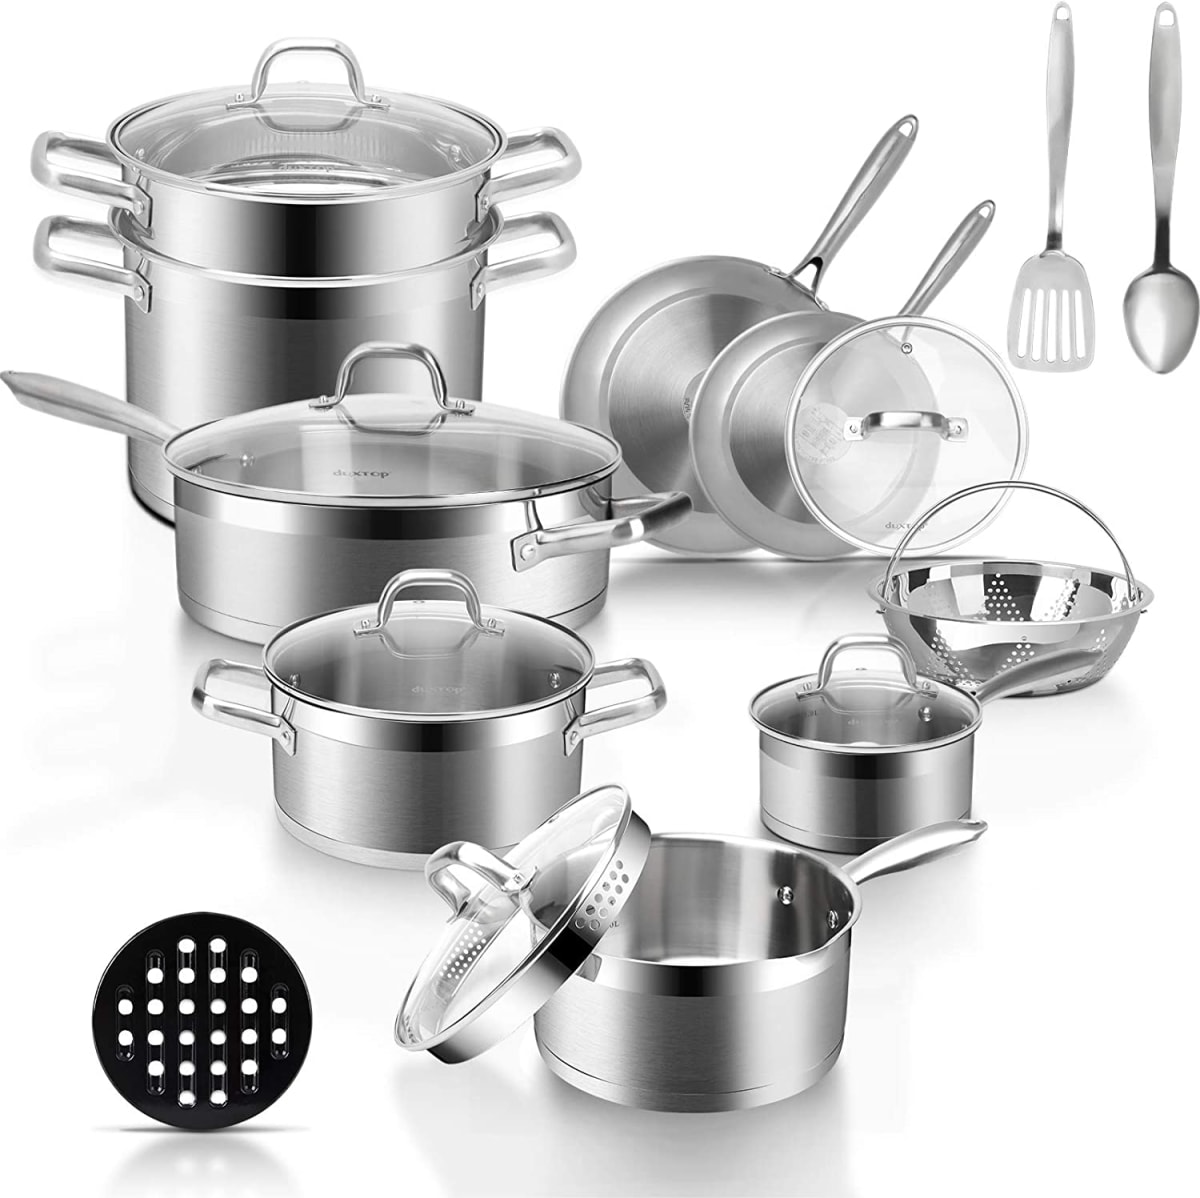 Duxtop Professional Stainless Steel Pots and Pans Set